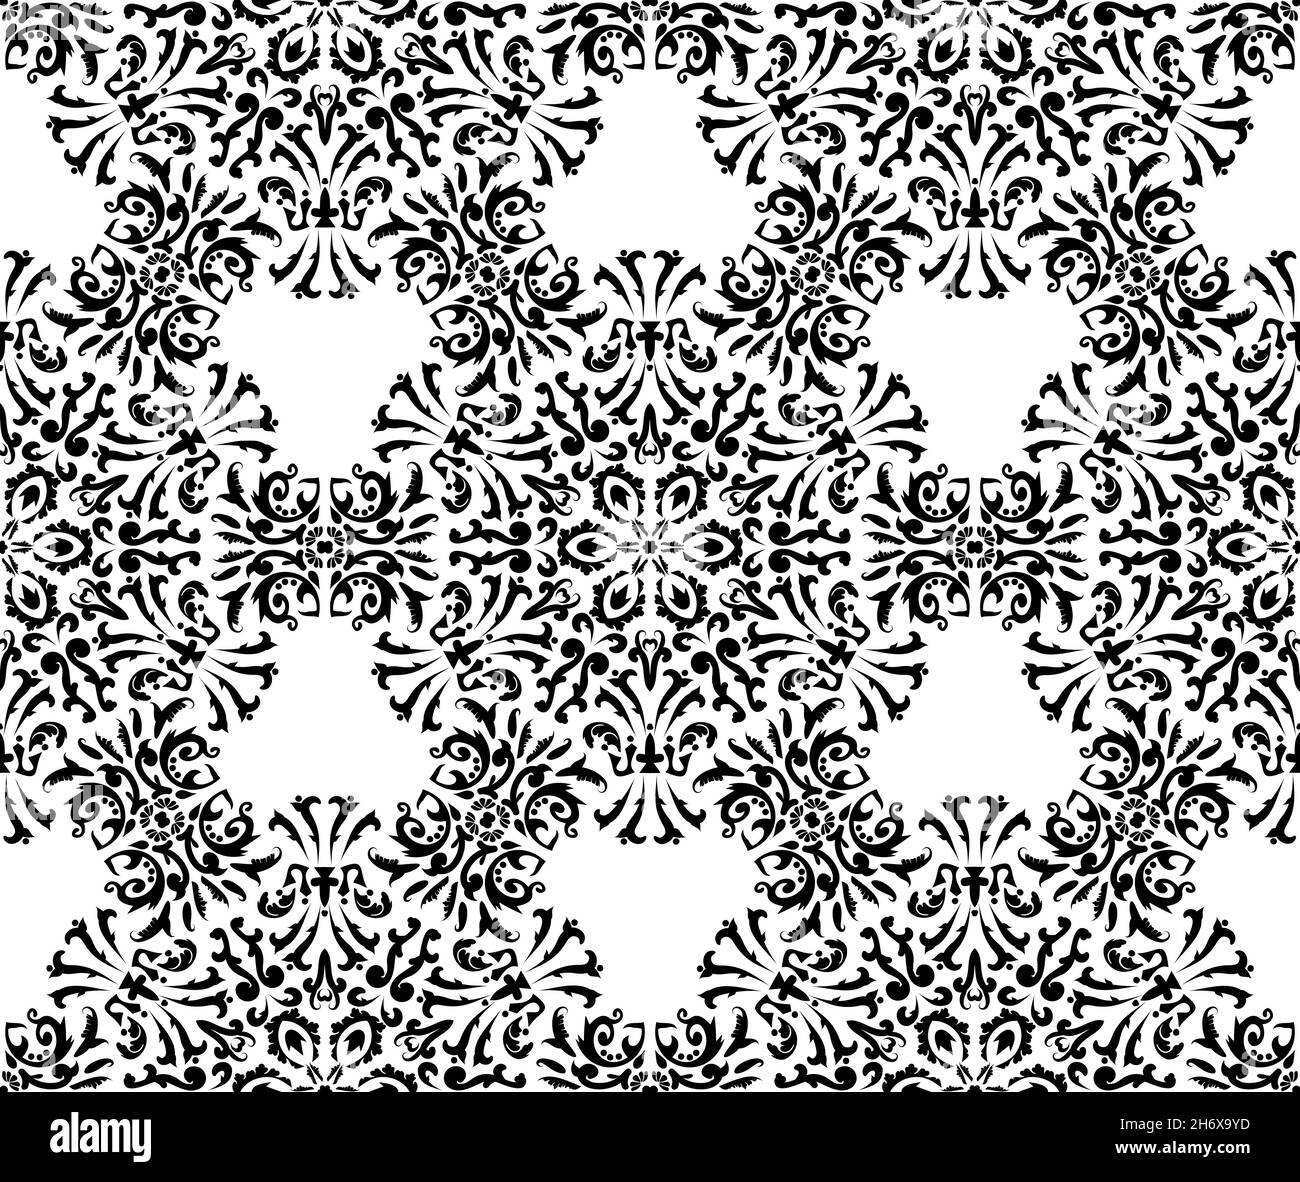 Elegant vector oriental black ornament on white background. Vintage Victorian damask. Seamless abstract pattern. For textiles wallpaper tiles or Stock Vector